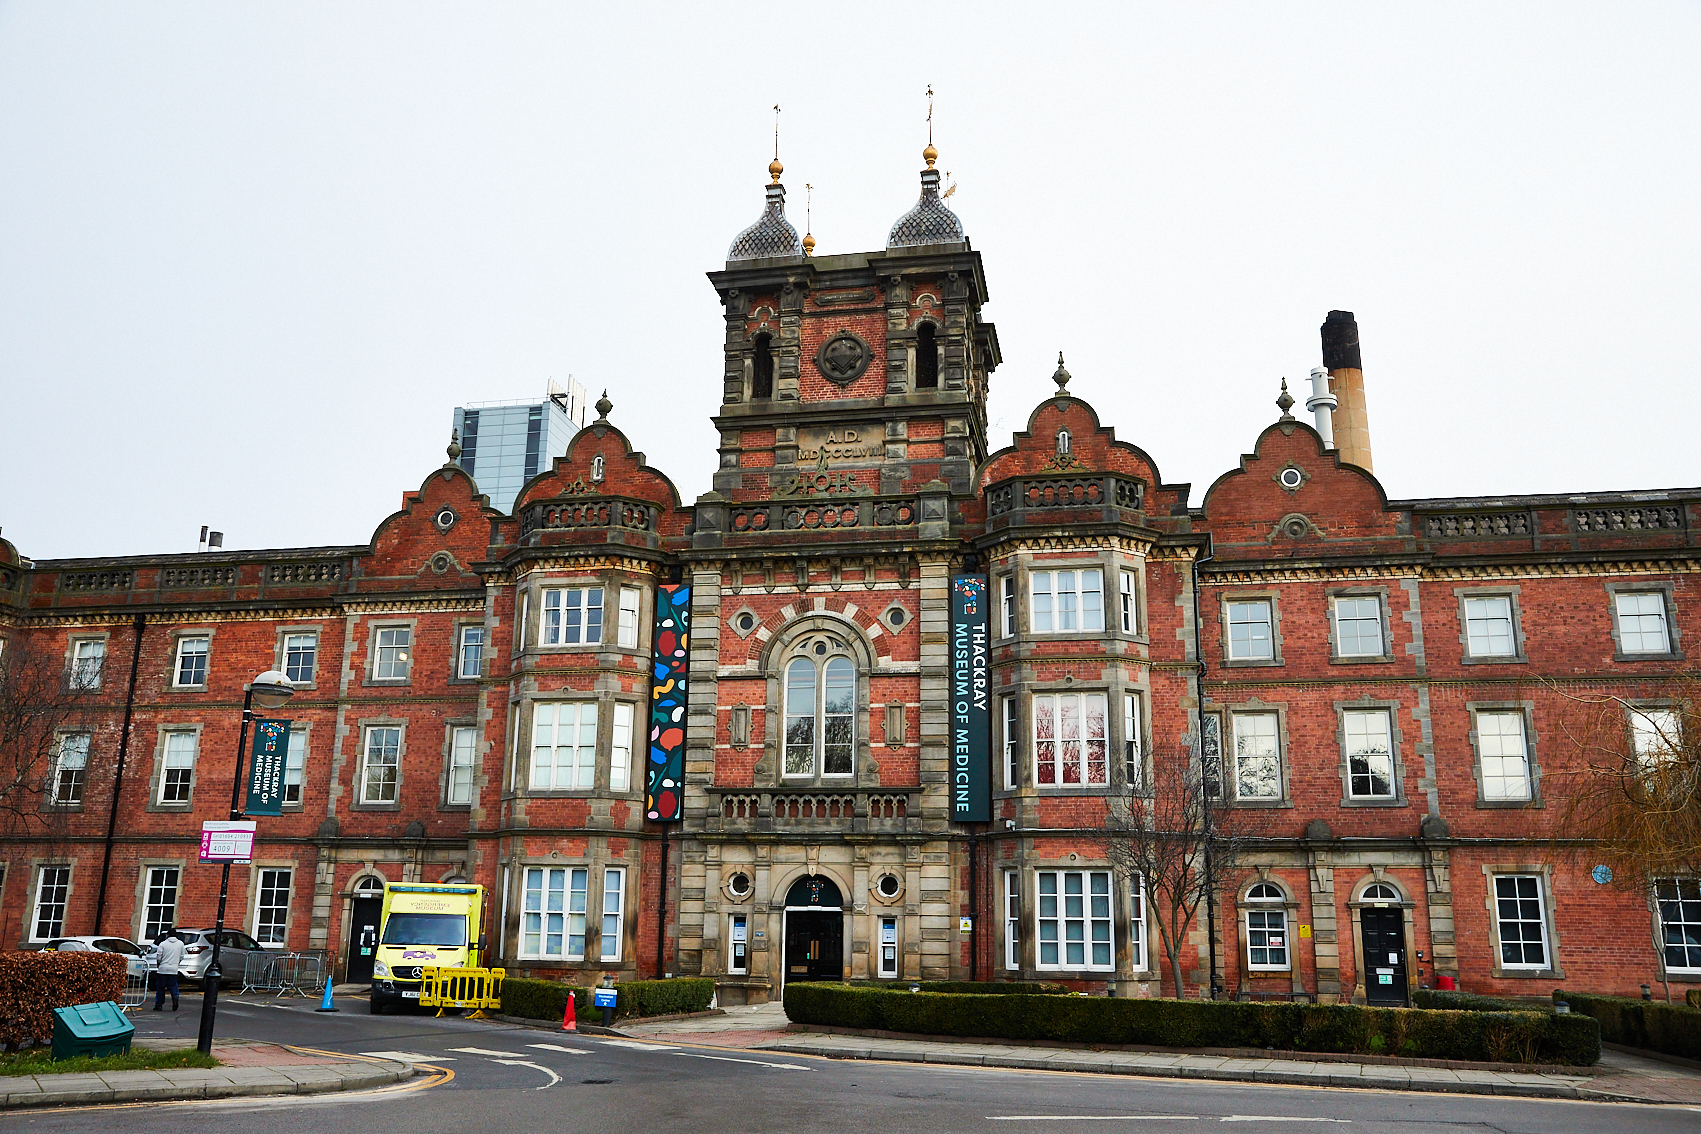 The Thackray Museum of Medicine building.
A grand building, formerly a workhouse, turned infirmary.